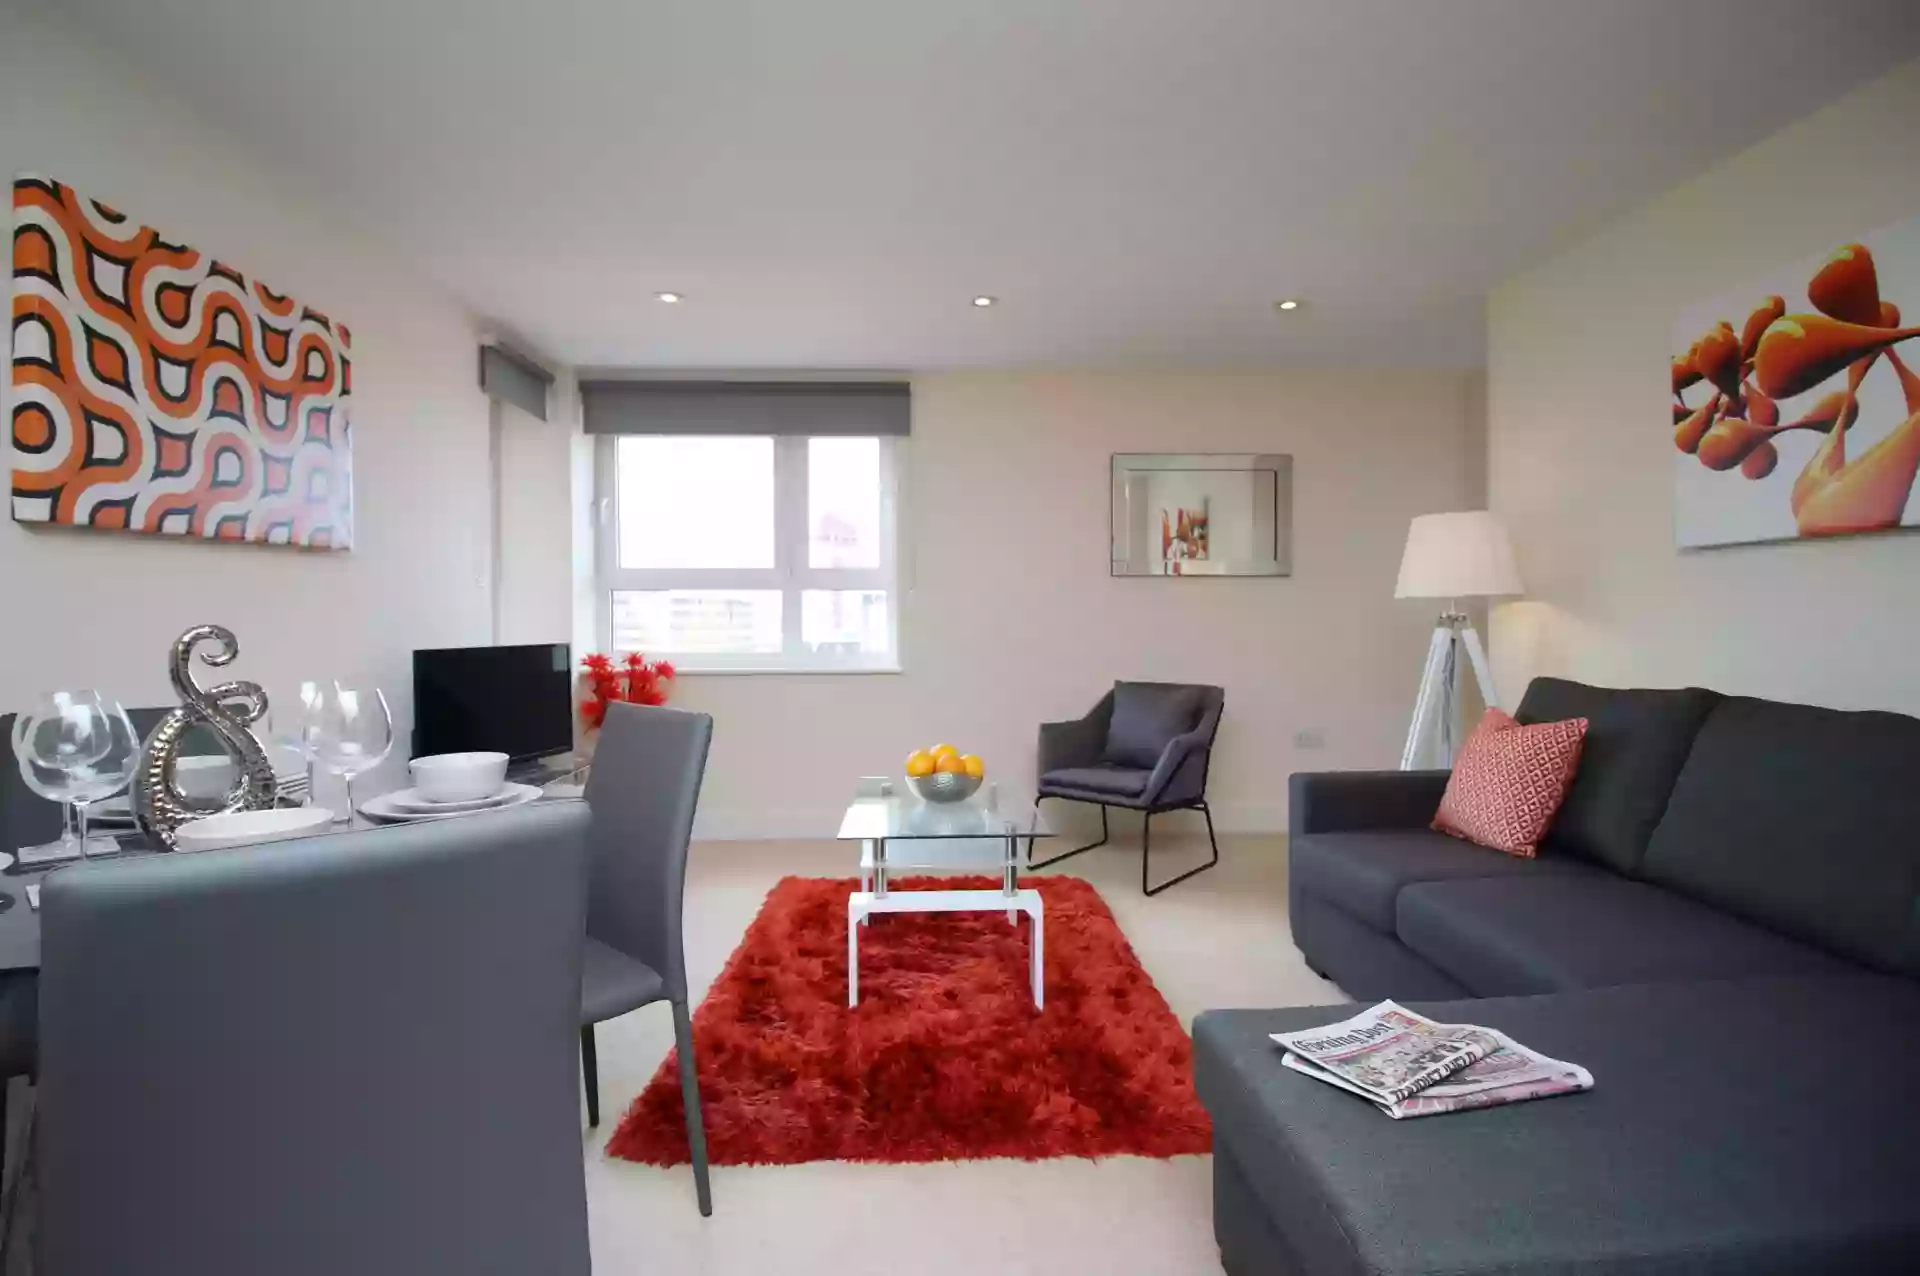 Stay South Wales Serviced Accommodation & Apartments Swansea - Little City House